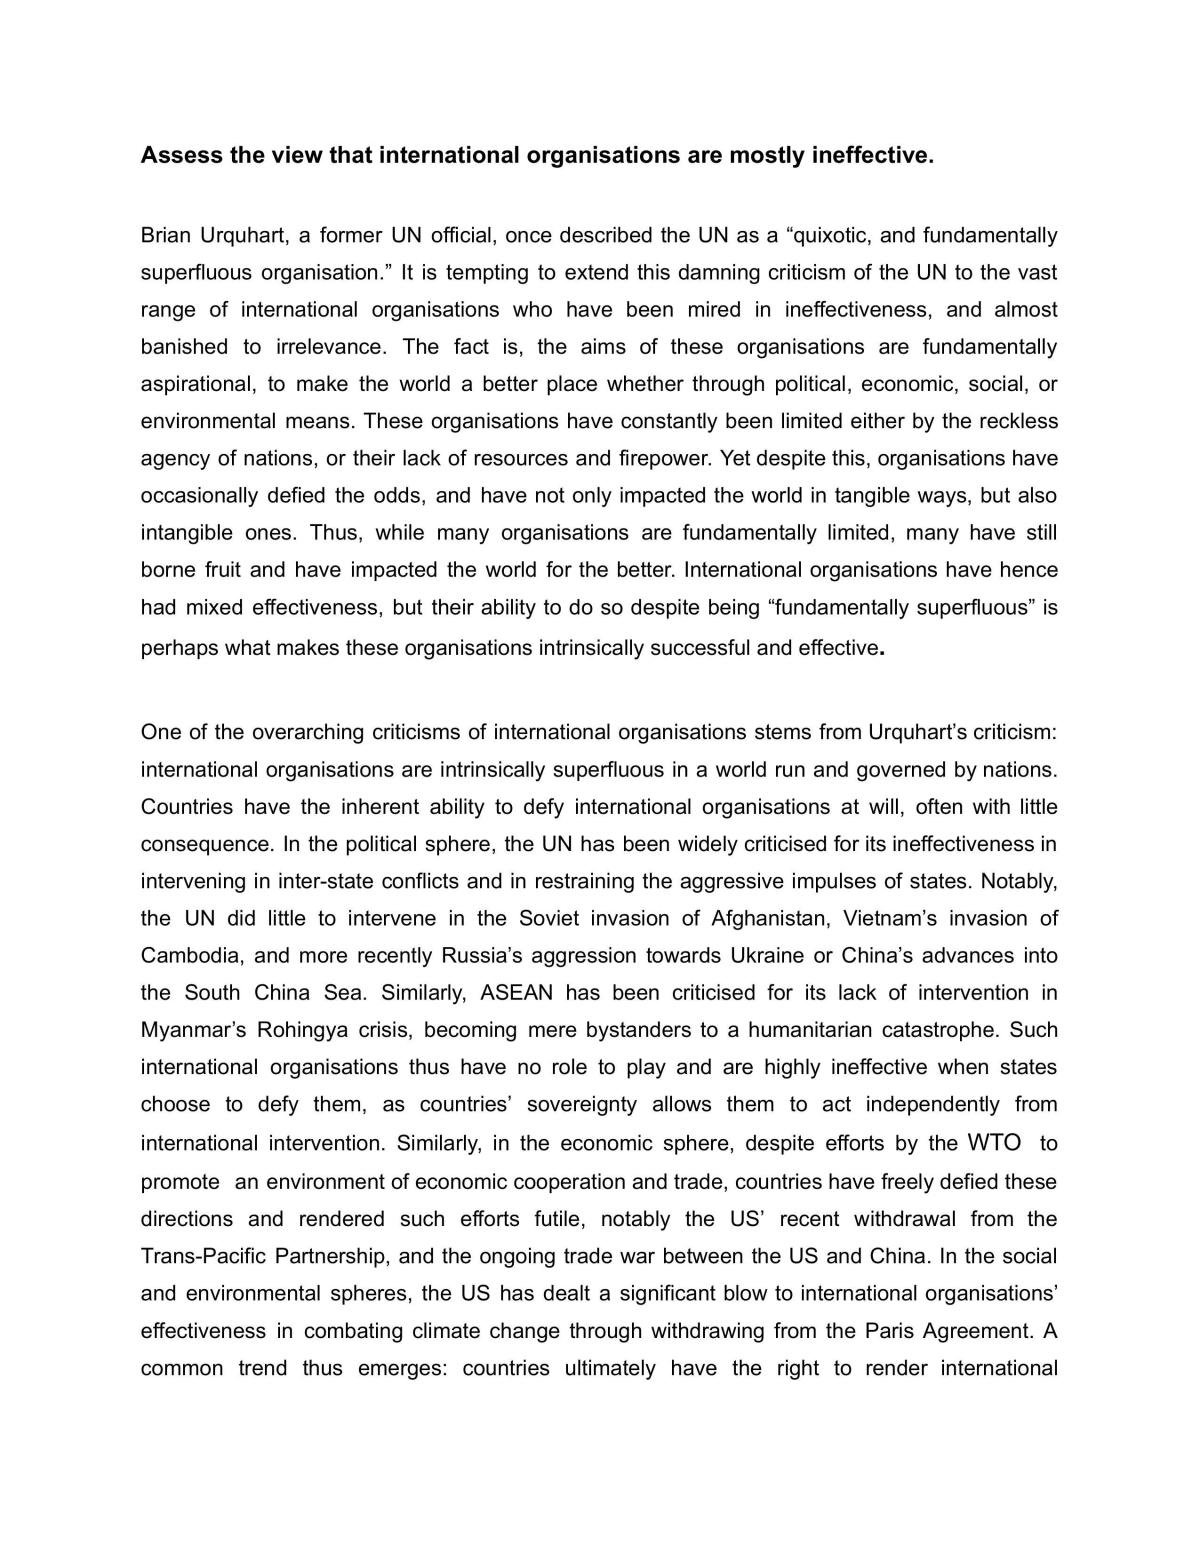 KI Essay - Assess the view (Gender and Governance) - Page 1